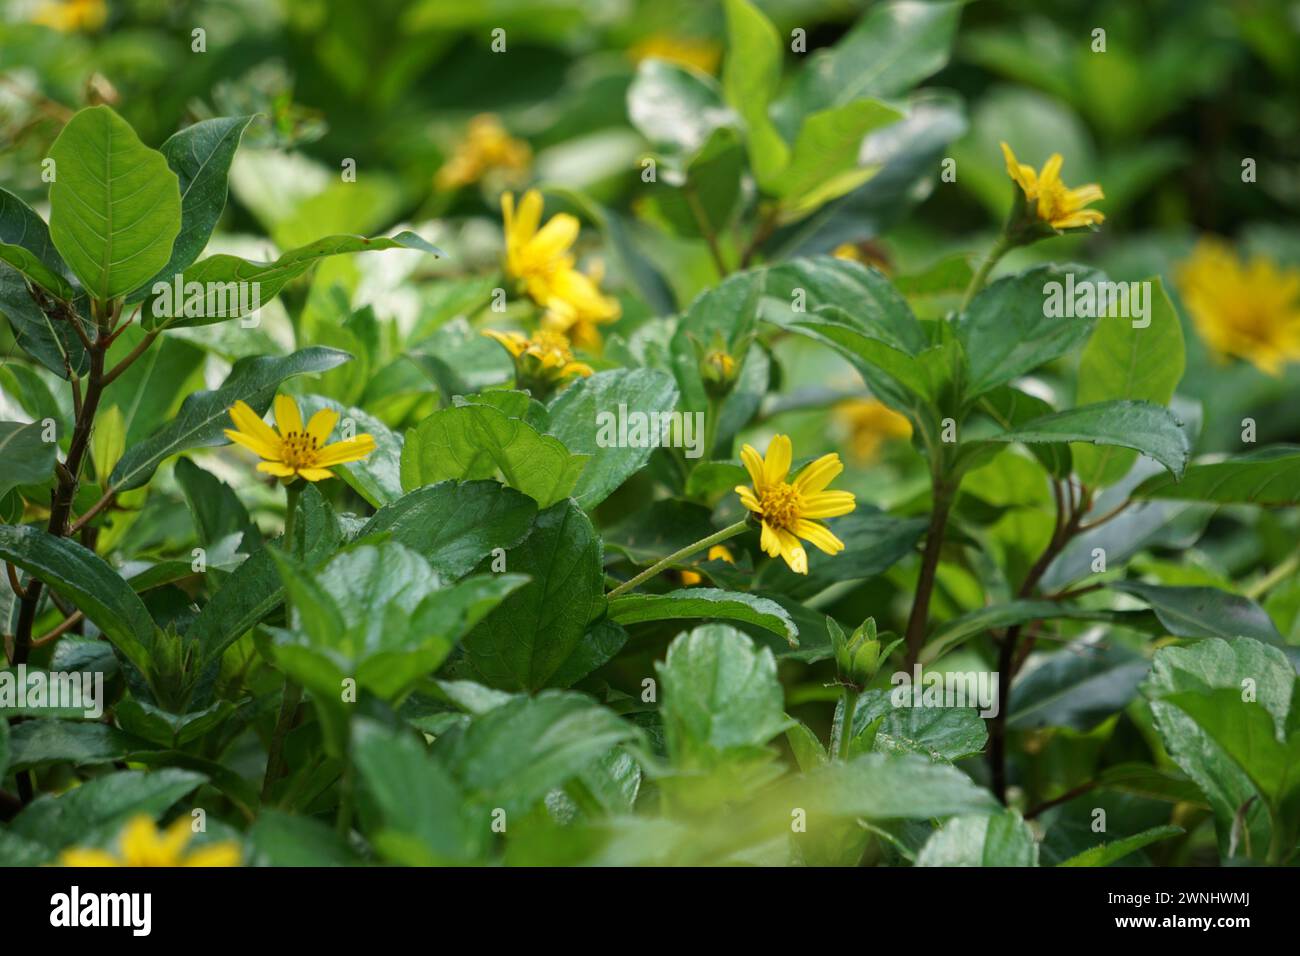 Sphagneticola trilobata with a natural background. Also called Bay Biscayne creeping oxeye, Singapore daisy, creeping oxeye, trailing daisy Stock Photo